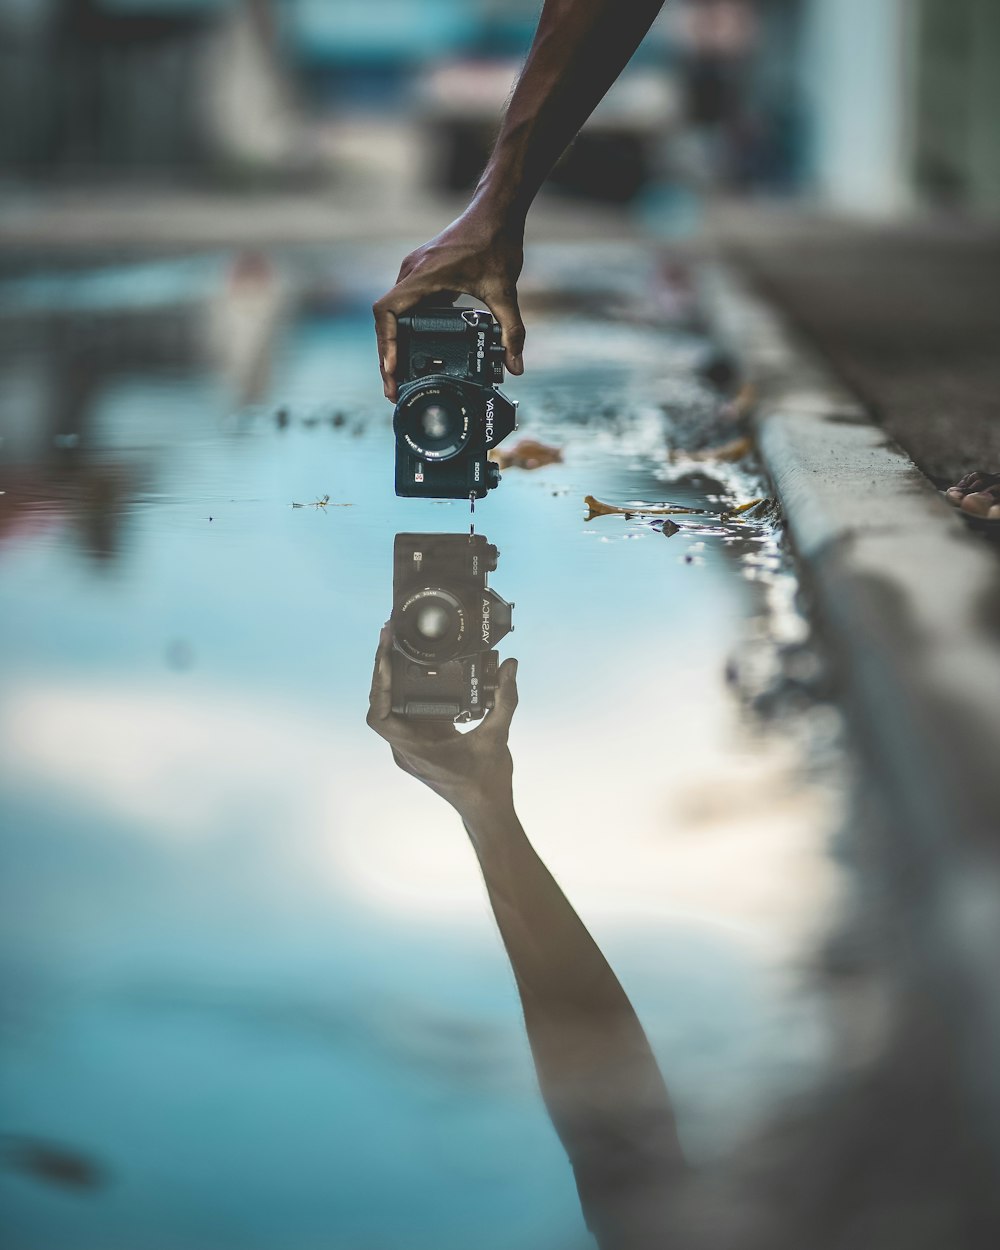 mirror photography of person holding DSLR camera with water reflection